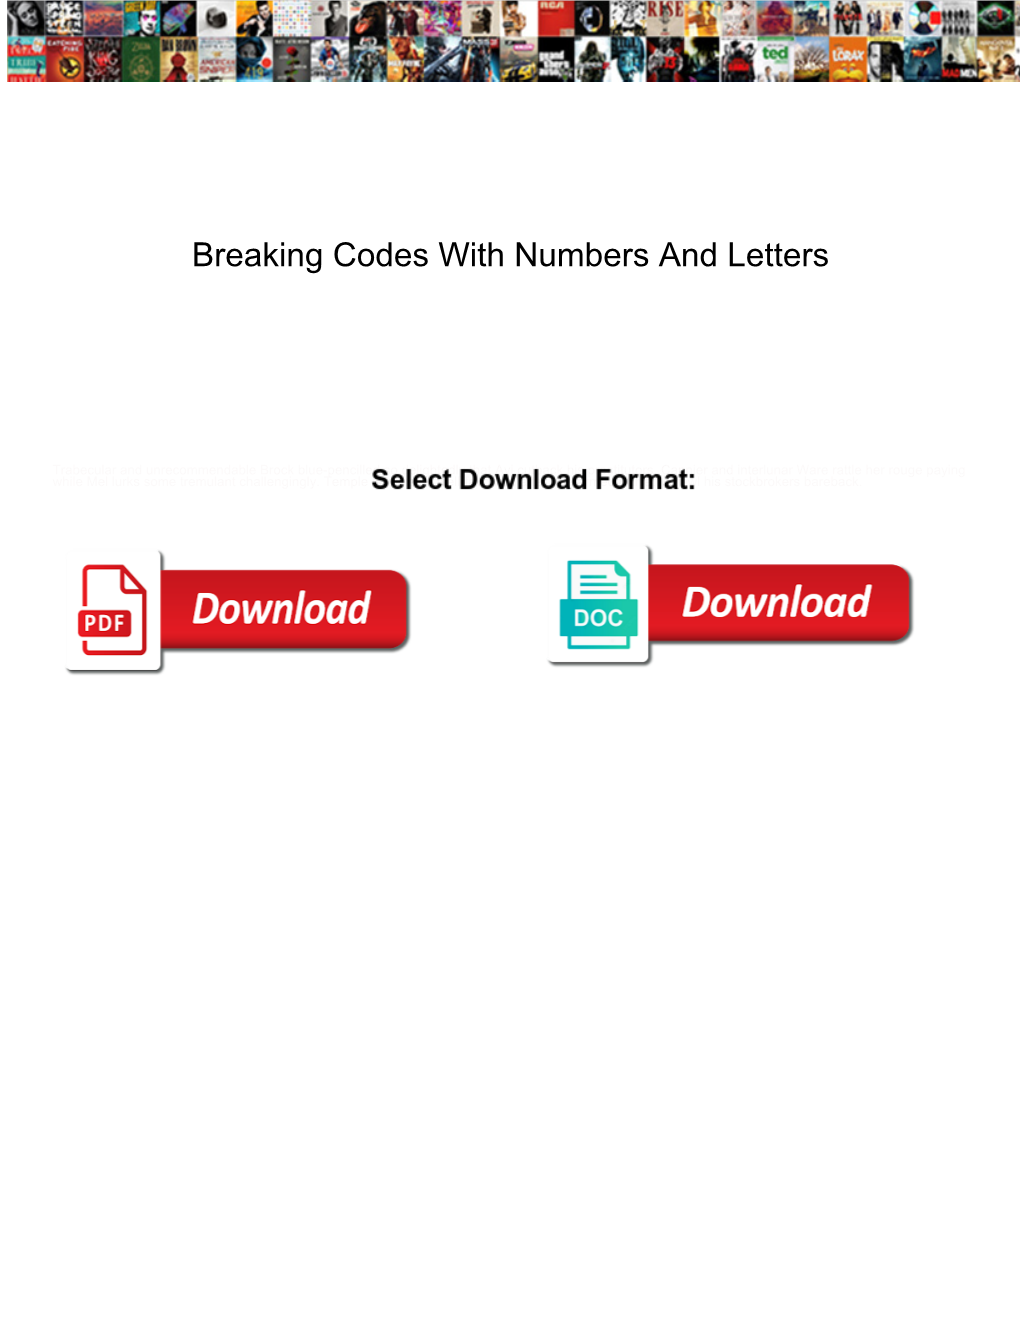 Breaking Codes with Numbers and Letters